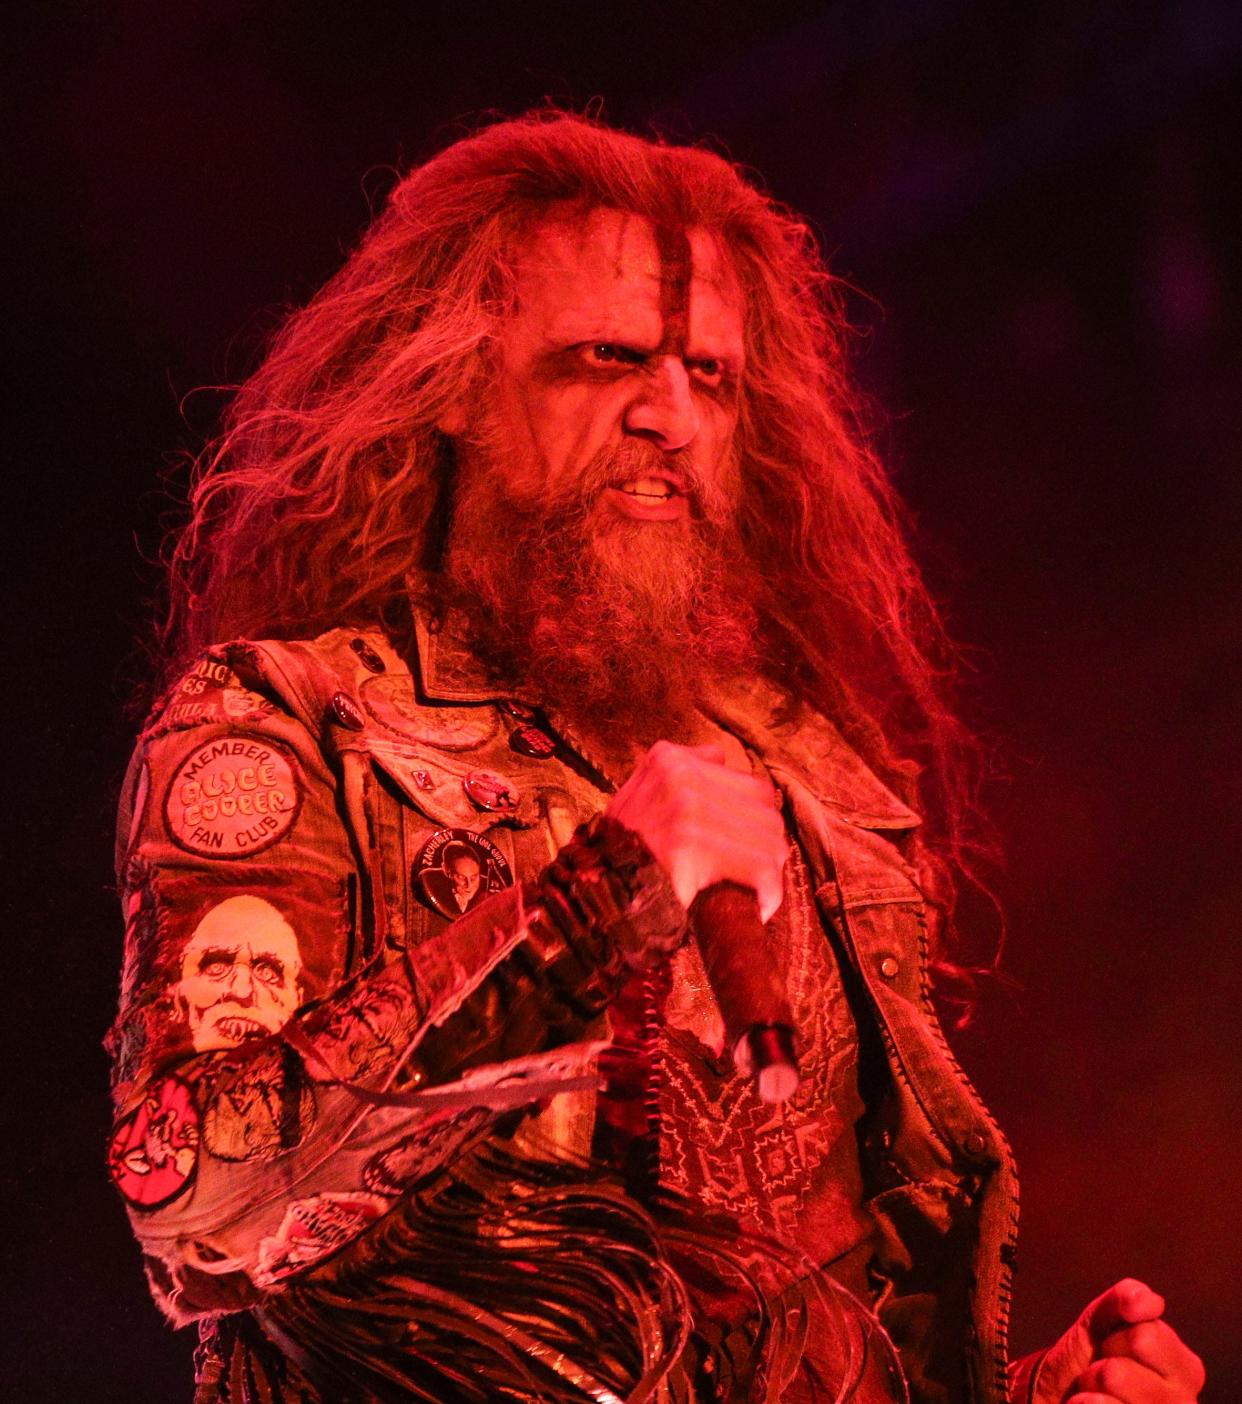 Rob Zombie comes to Riverbend Music Center on Sept. 13, along with co-headliner Alice Cooper. Tickets go on sale Friday.